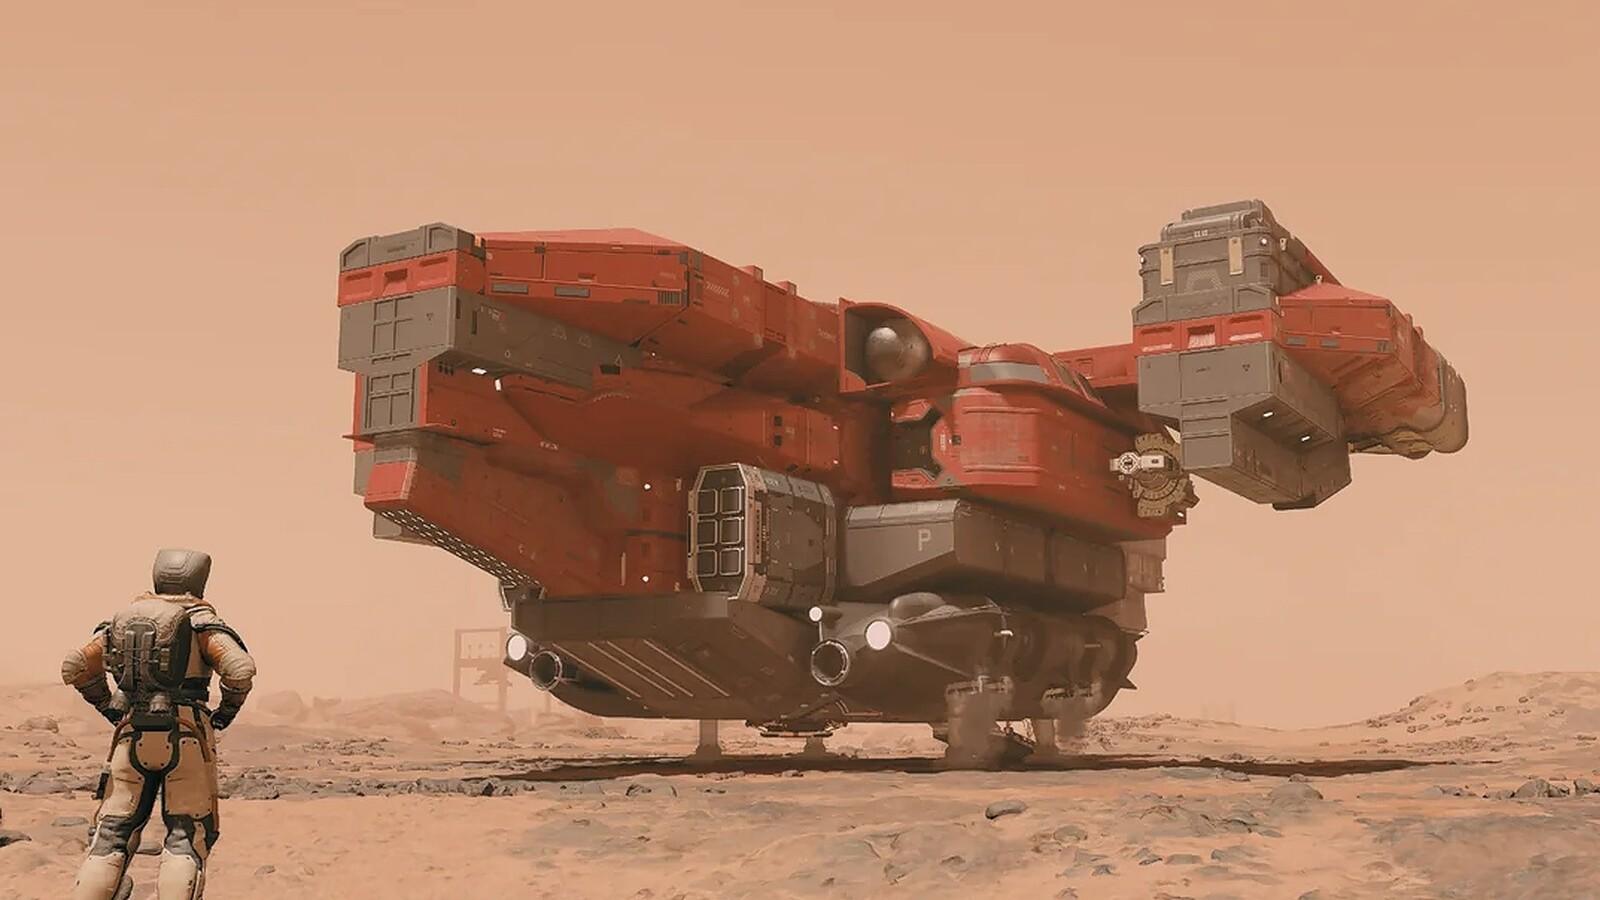 A Cabal Harvester sits idle on the sands of a desert planet